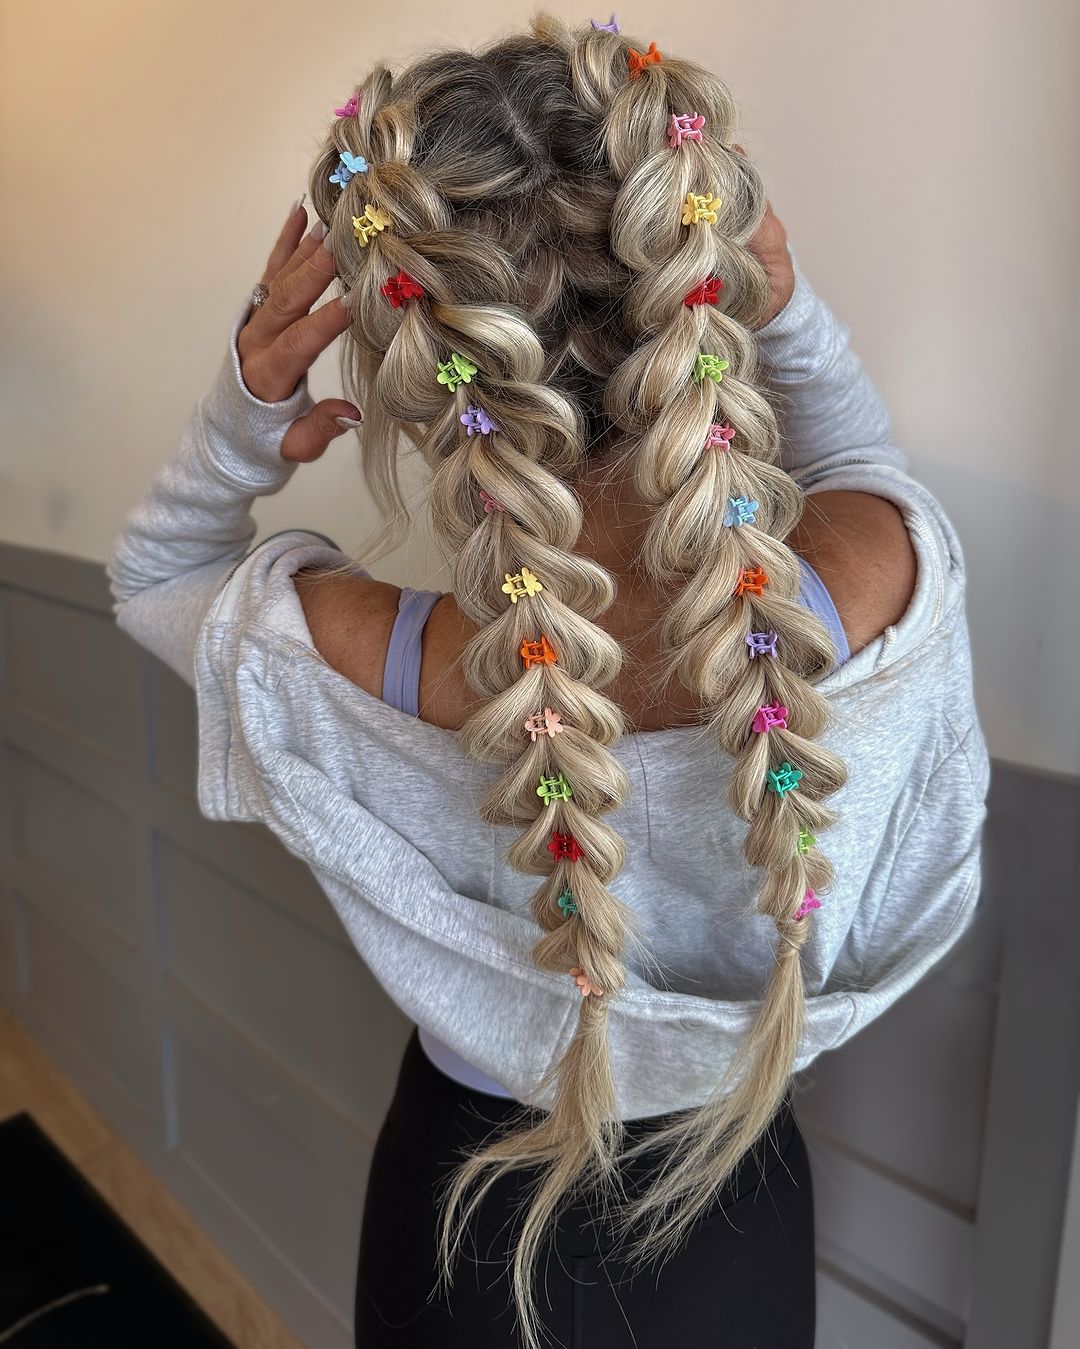 boho braids with cute colorful hair clips